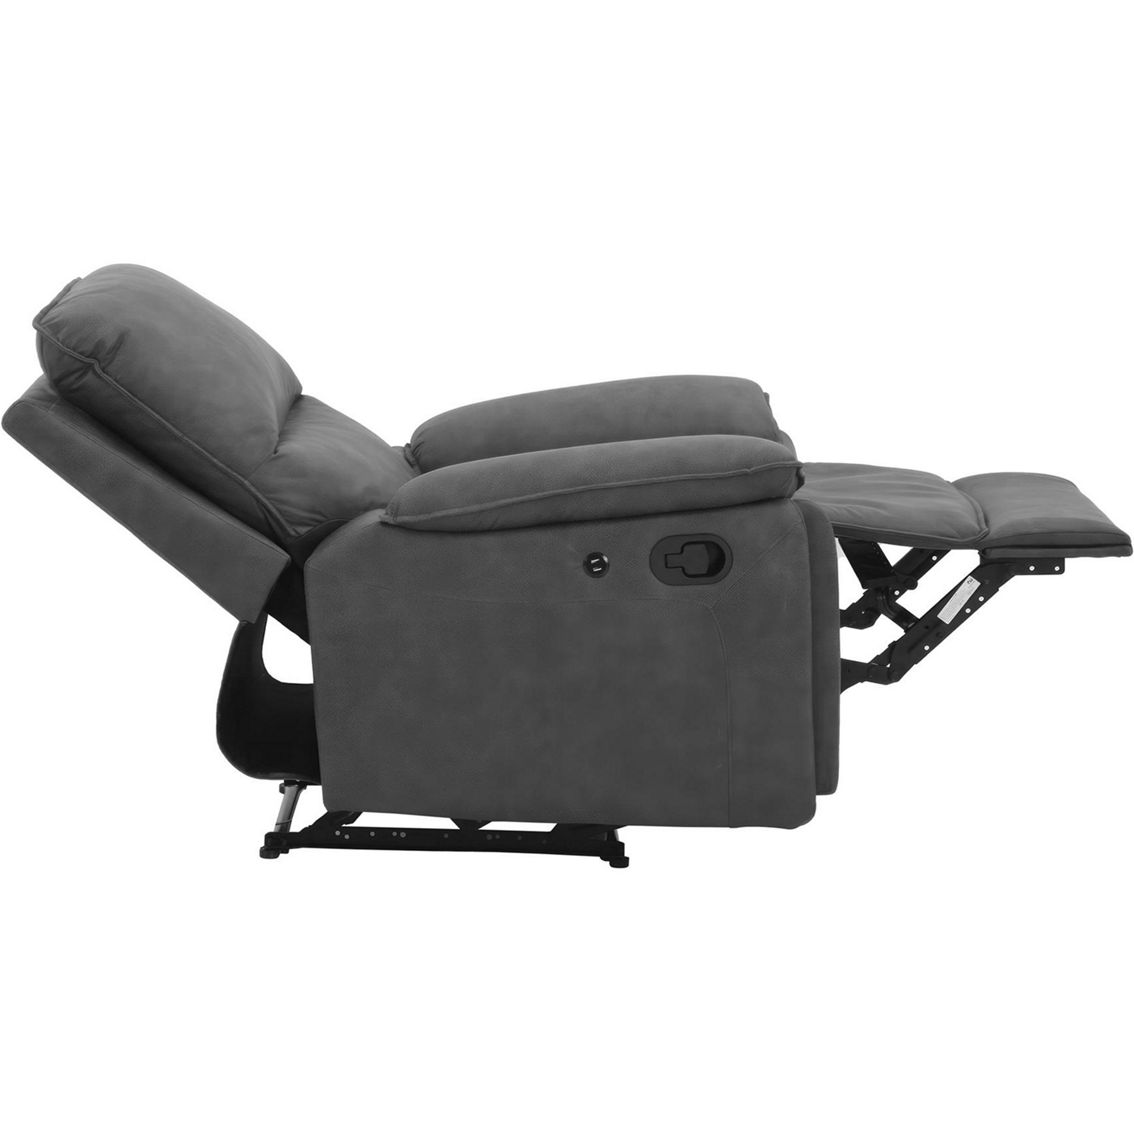 DHP Labatte Recliner with Dual USB Port, Charcoal Faux Leather - Image 4 of 8